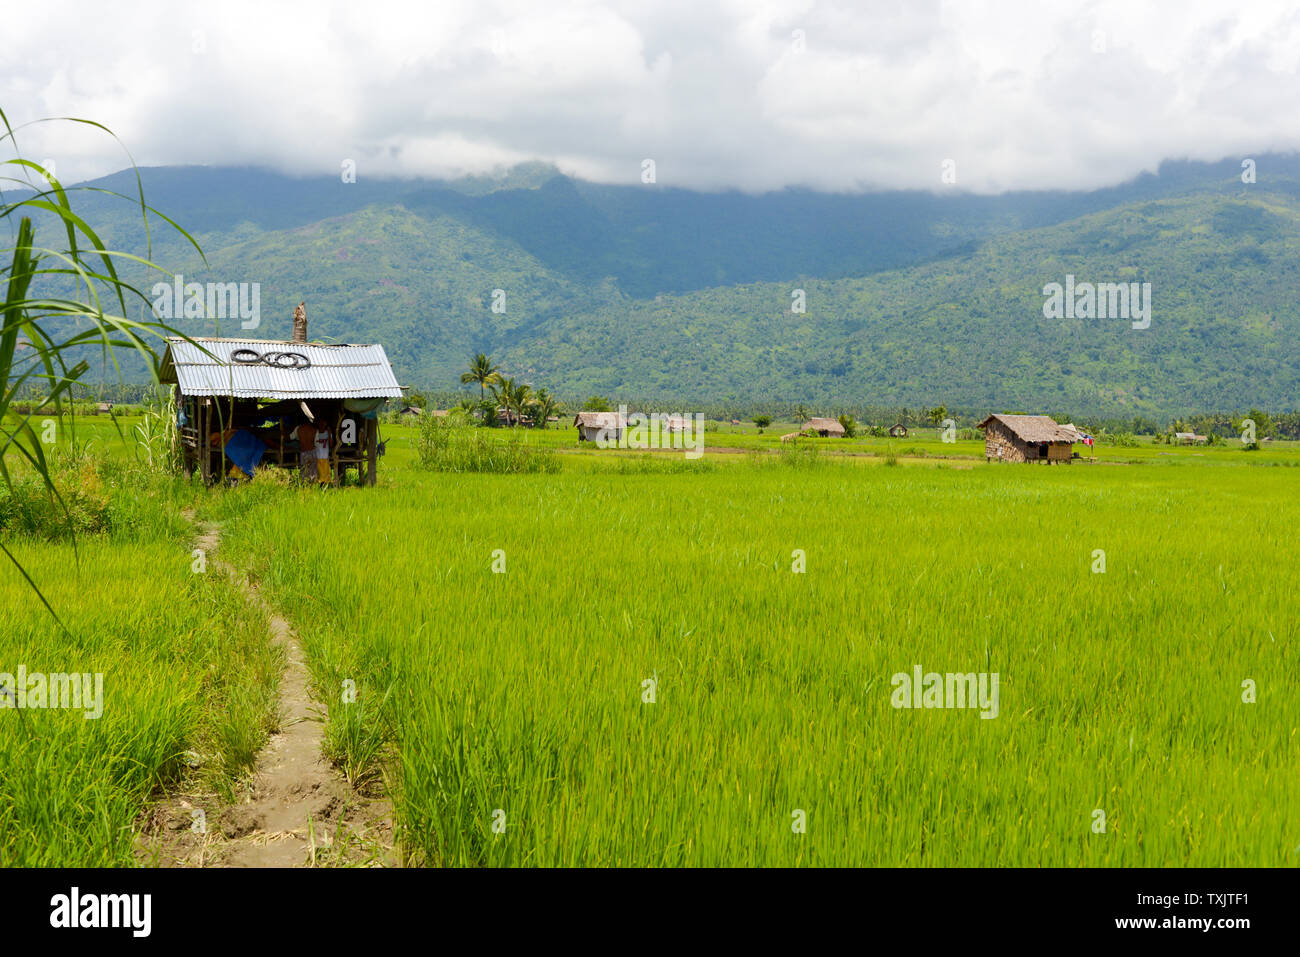 shacks on a rice field in the philippines Stock Photo